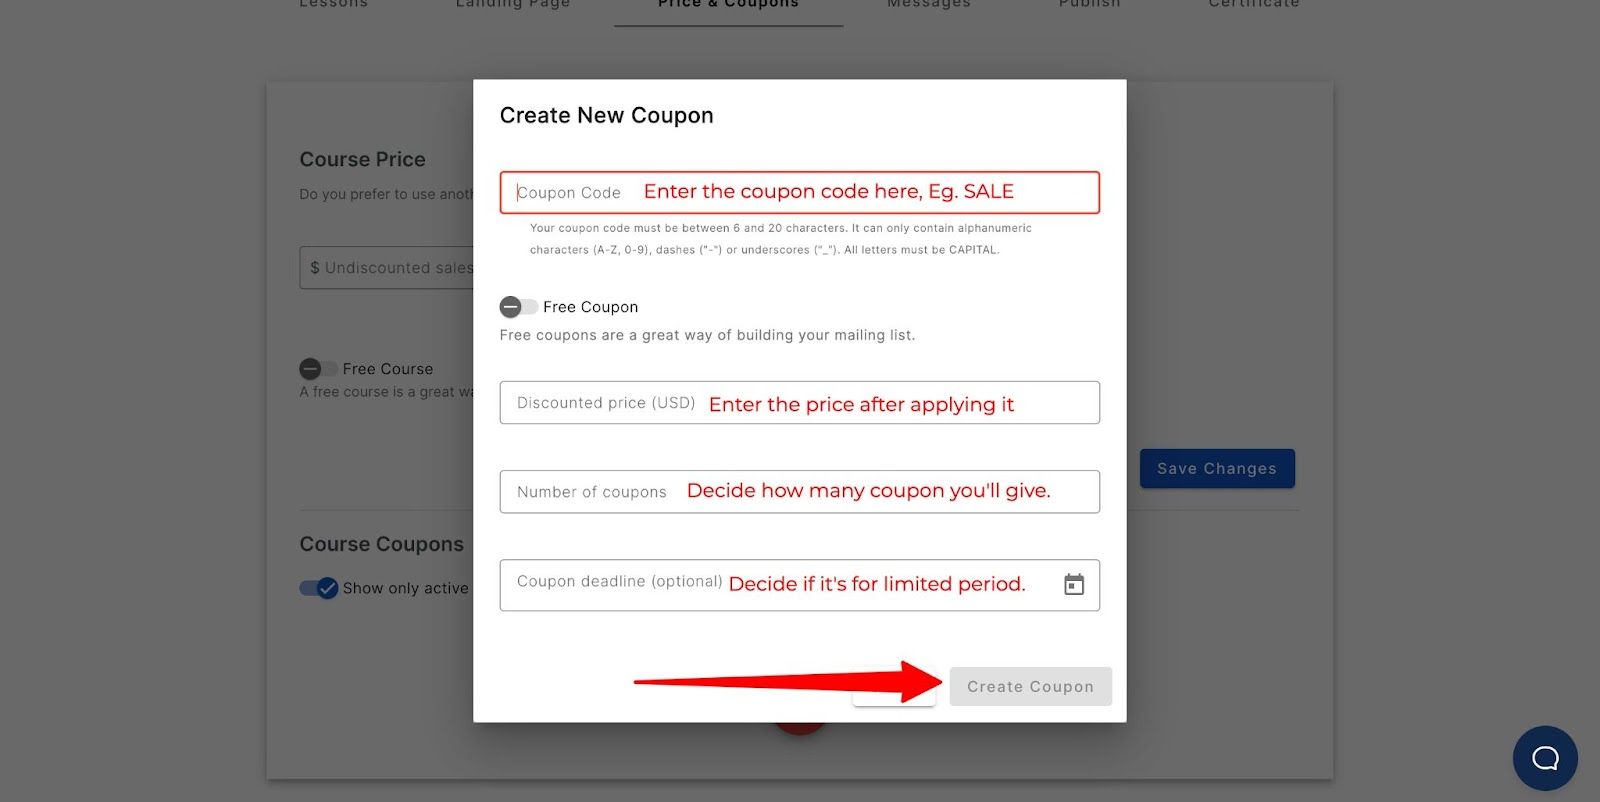 creating a new coupon